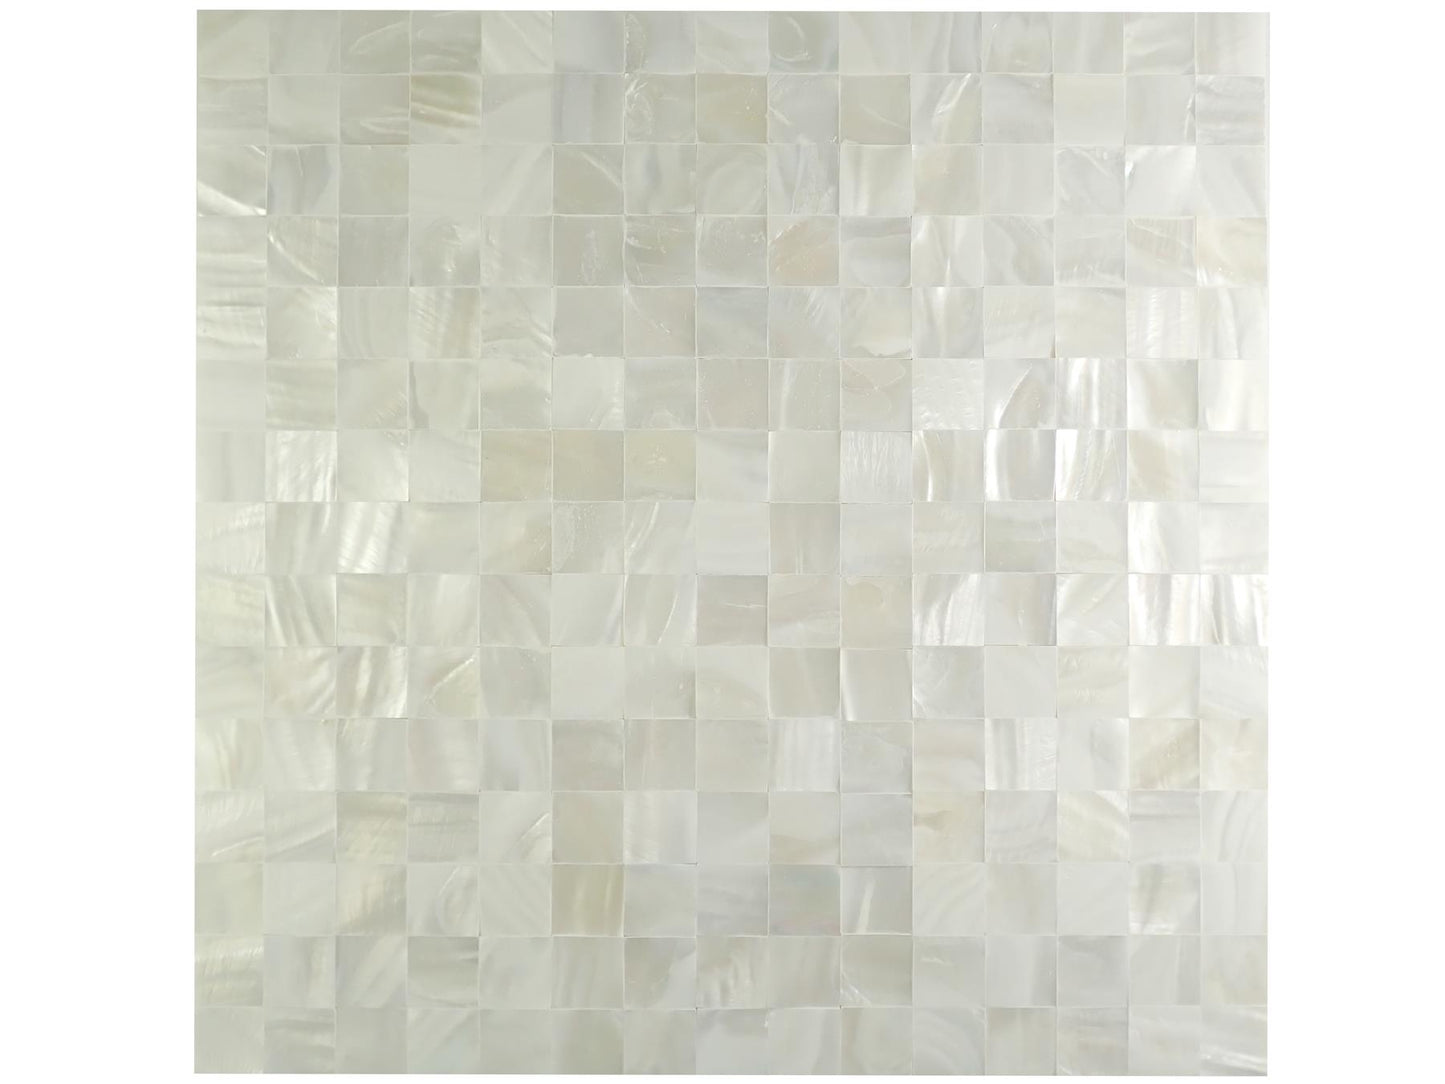 Incudo White Gapless Square Mosaic Mother of Pearl Tile - 300x300x2mm (11.8x11.81x0.08")